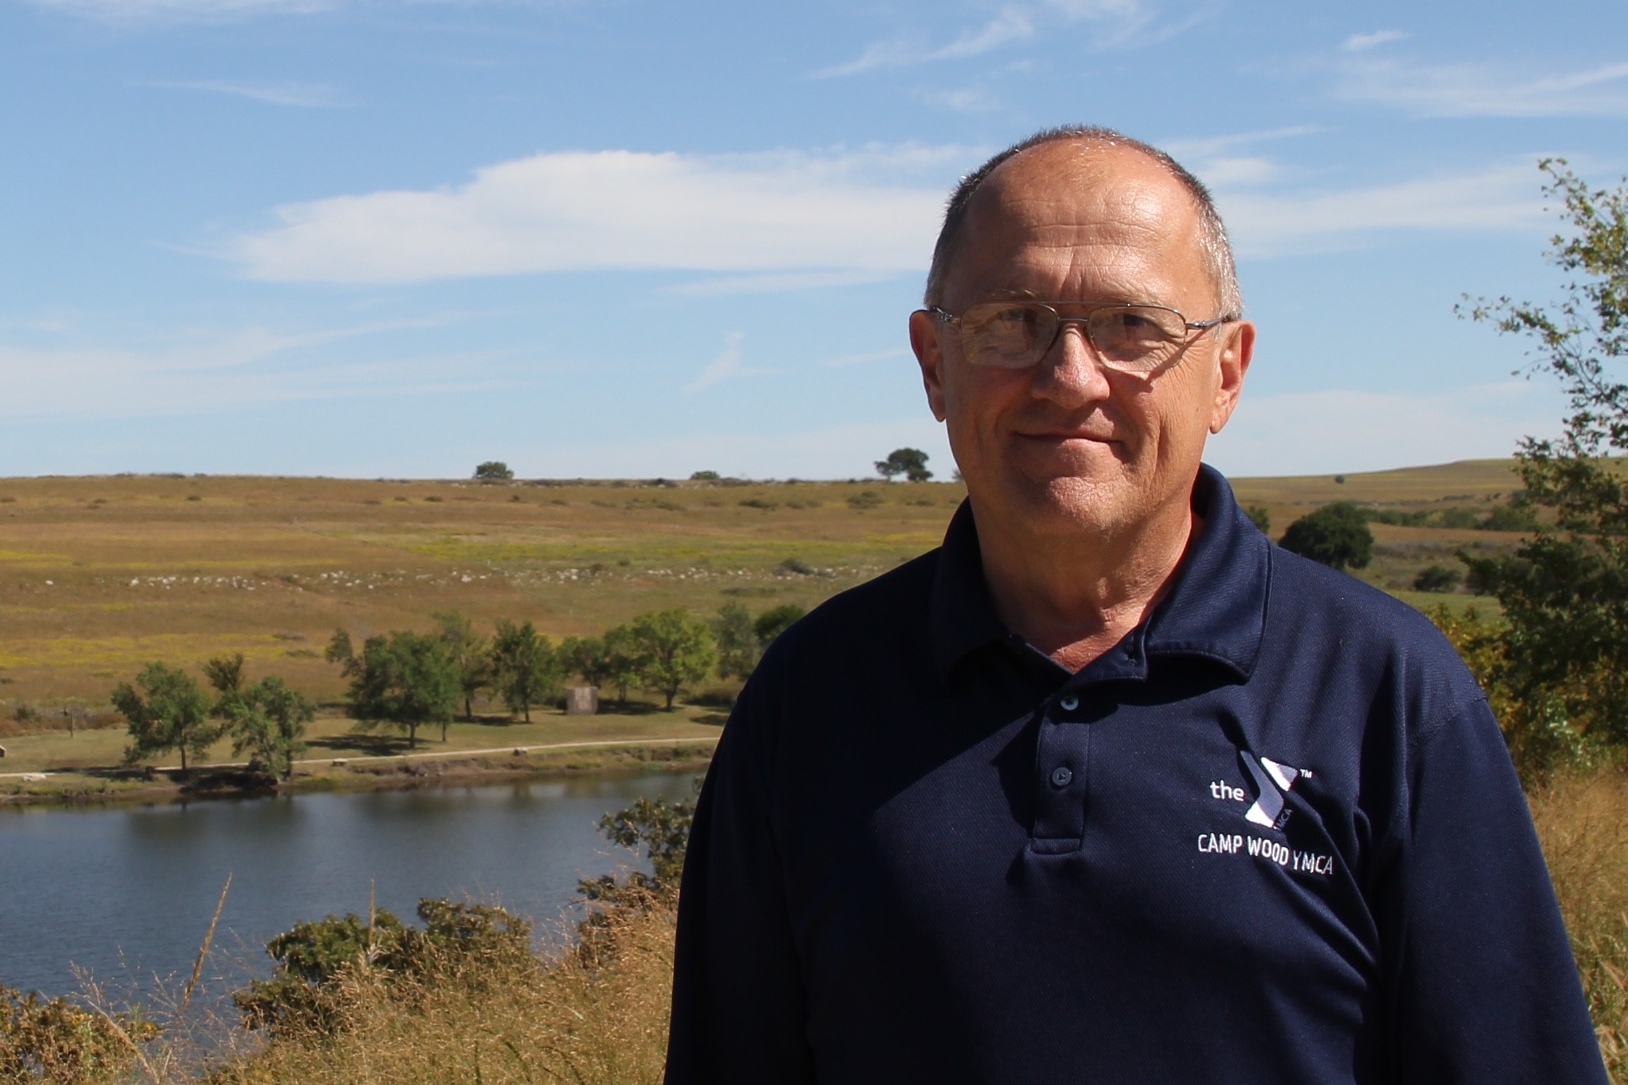 Ken Wold, executive director, has worked to not only improve buildings and programs during his 20-year tenure, but to also improve camp's stewardship of the Tallgrass prairie ecosystem.